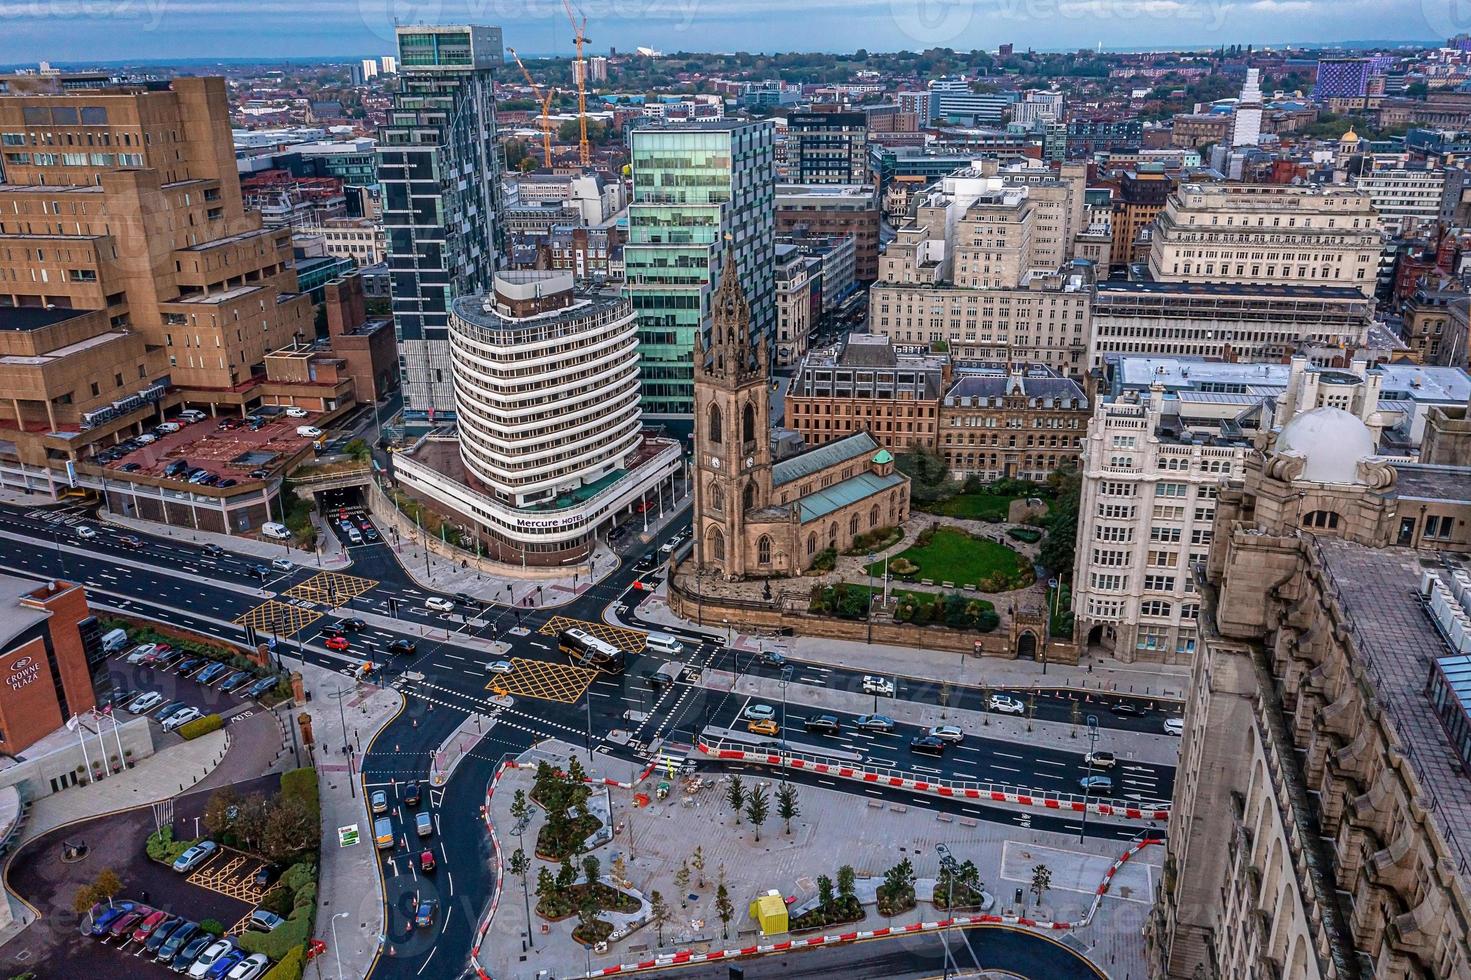 Aerial view of the Liverpool skyline in United Kingdom photo